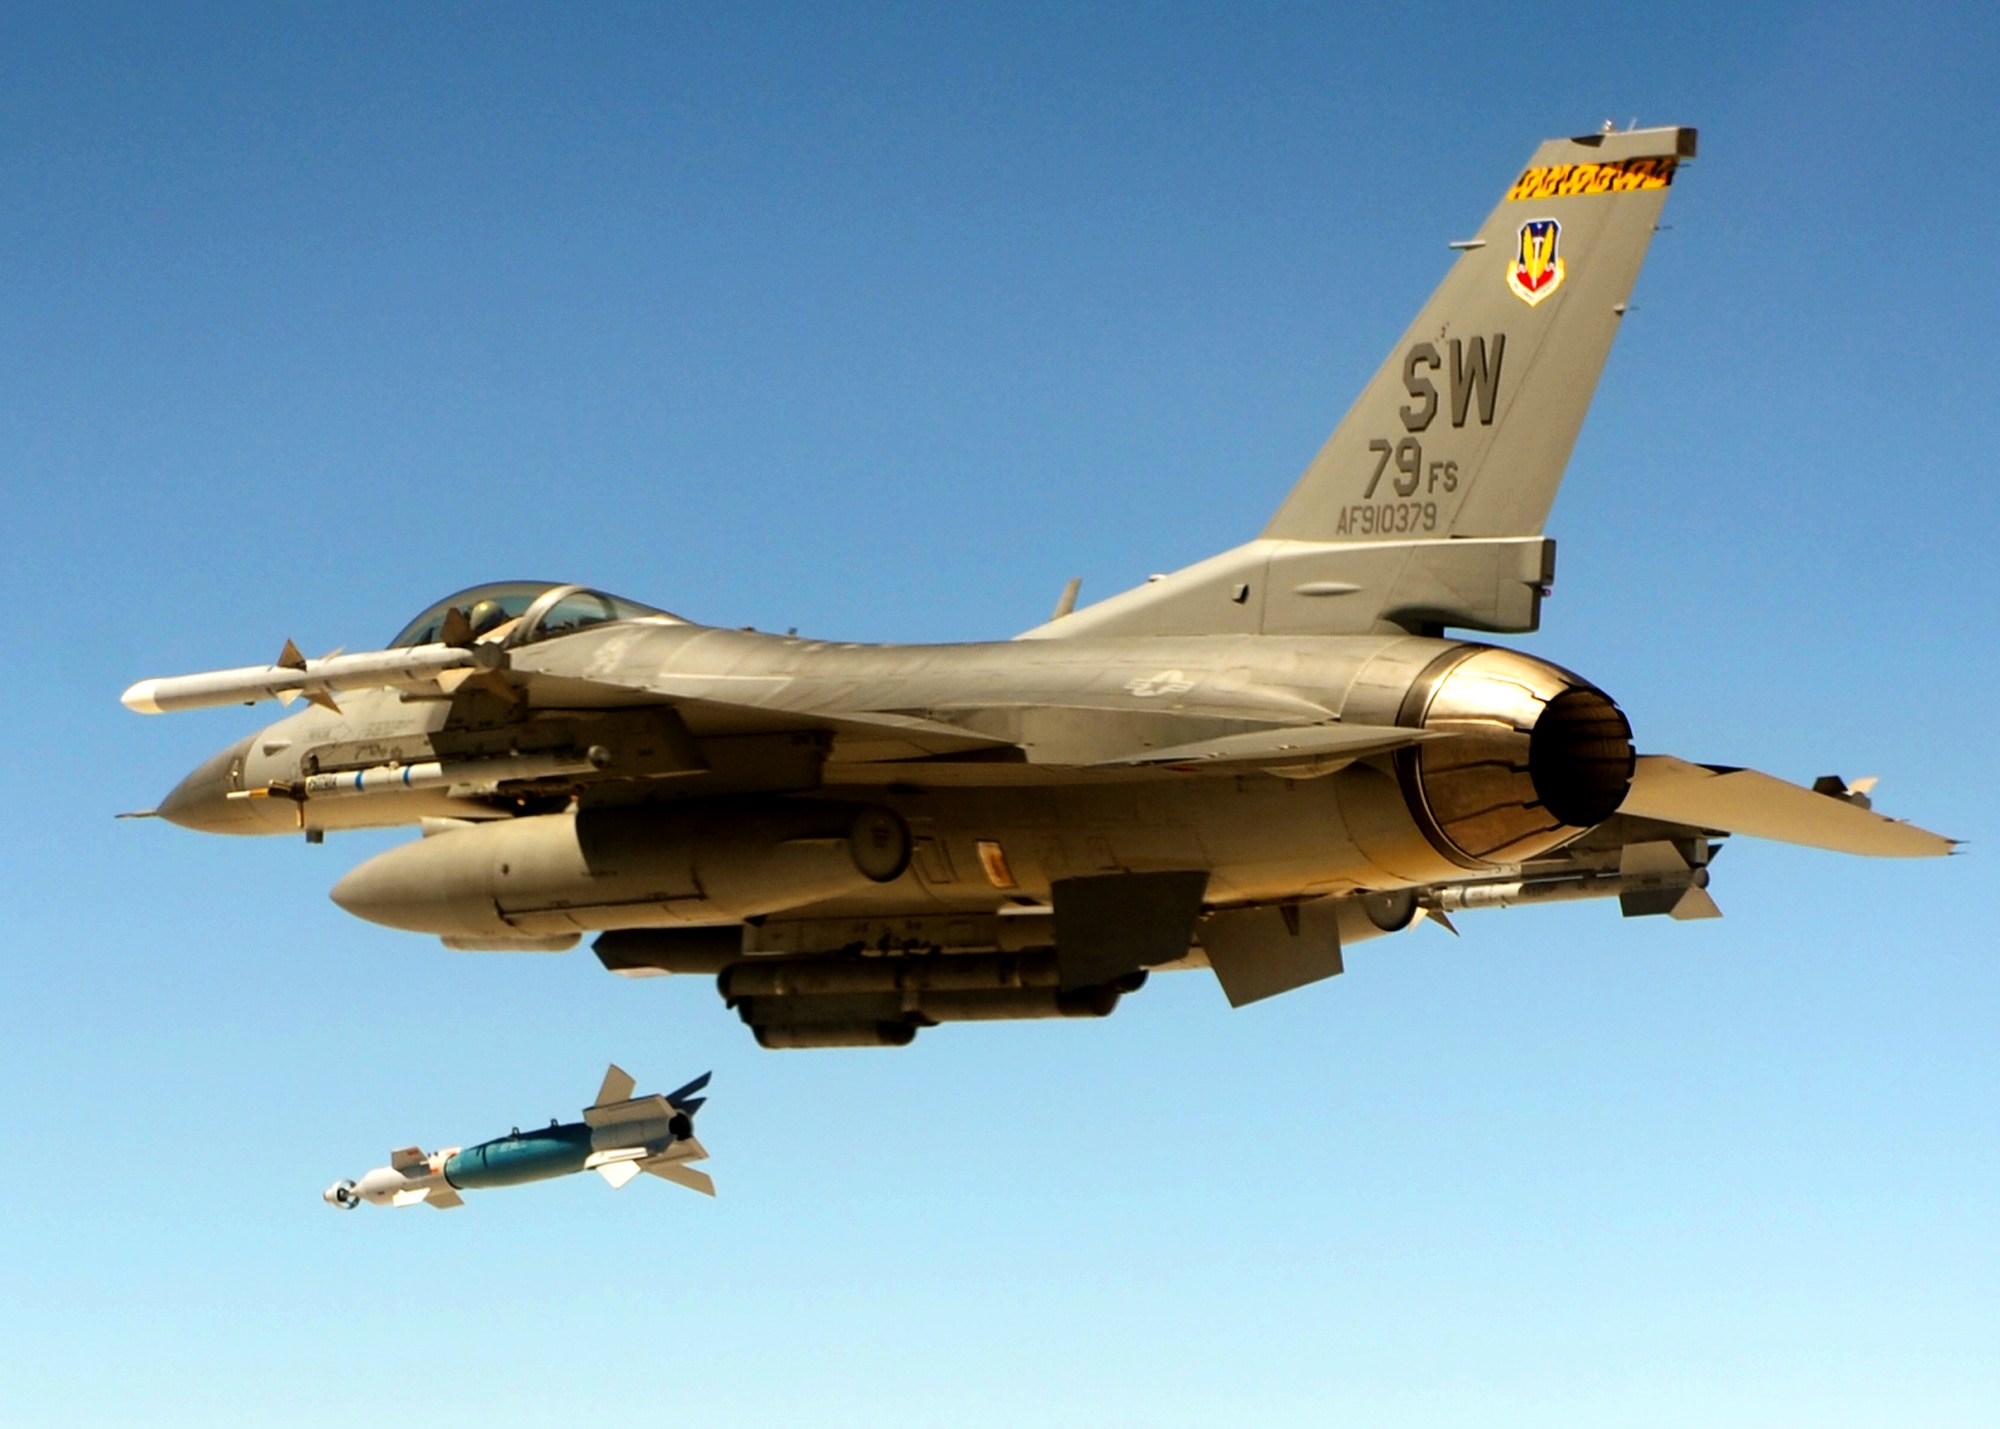 An F-16 Fighting Falcon from the 79th Fighter Squadron at Shaw Air Force Base, S.C., releases a Guided Bomb Unit-12 during a Weapons System Evaluation Program mission at Hill Air Force Base, Utah. This is the second of three weeks of evaluation at Hill AFB by the 53rd Weapons Evaluation Group.  The WSEP program is used to evaluate the effectiveness and suitability of combat air force weapon systems. The evaluations are accomplished during tactical deliveries of fighter, bomber and unmanned aerial system precision guided munitions, on realistic targets with air-to-air and surface-to-air defenses. For many of the aircrew participating in WSEP, it is the first time employing live weapons. This provides a level of combat experience many units face during combat.  Courtesy photo.